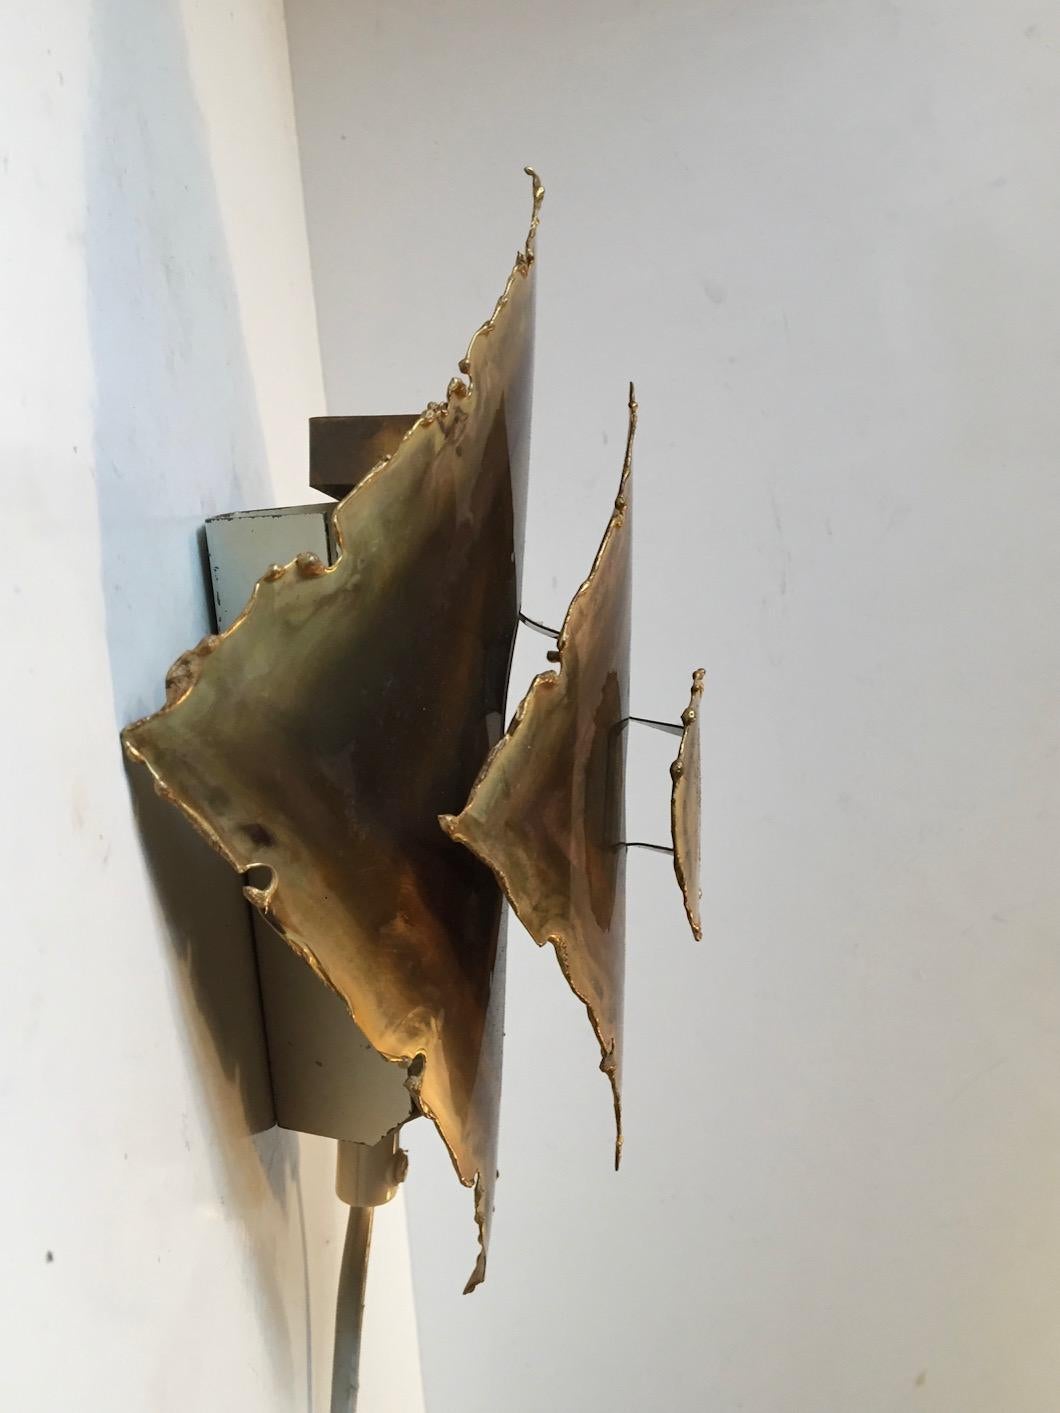 Torch cut, acid treated and patinated wall sconce manufactured by Holm-Sorensen Belysning in Copenhagen, circa 1960. Measurements: H 7.25, W 5.75 inches. Condition: very good.